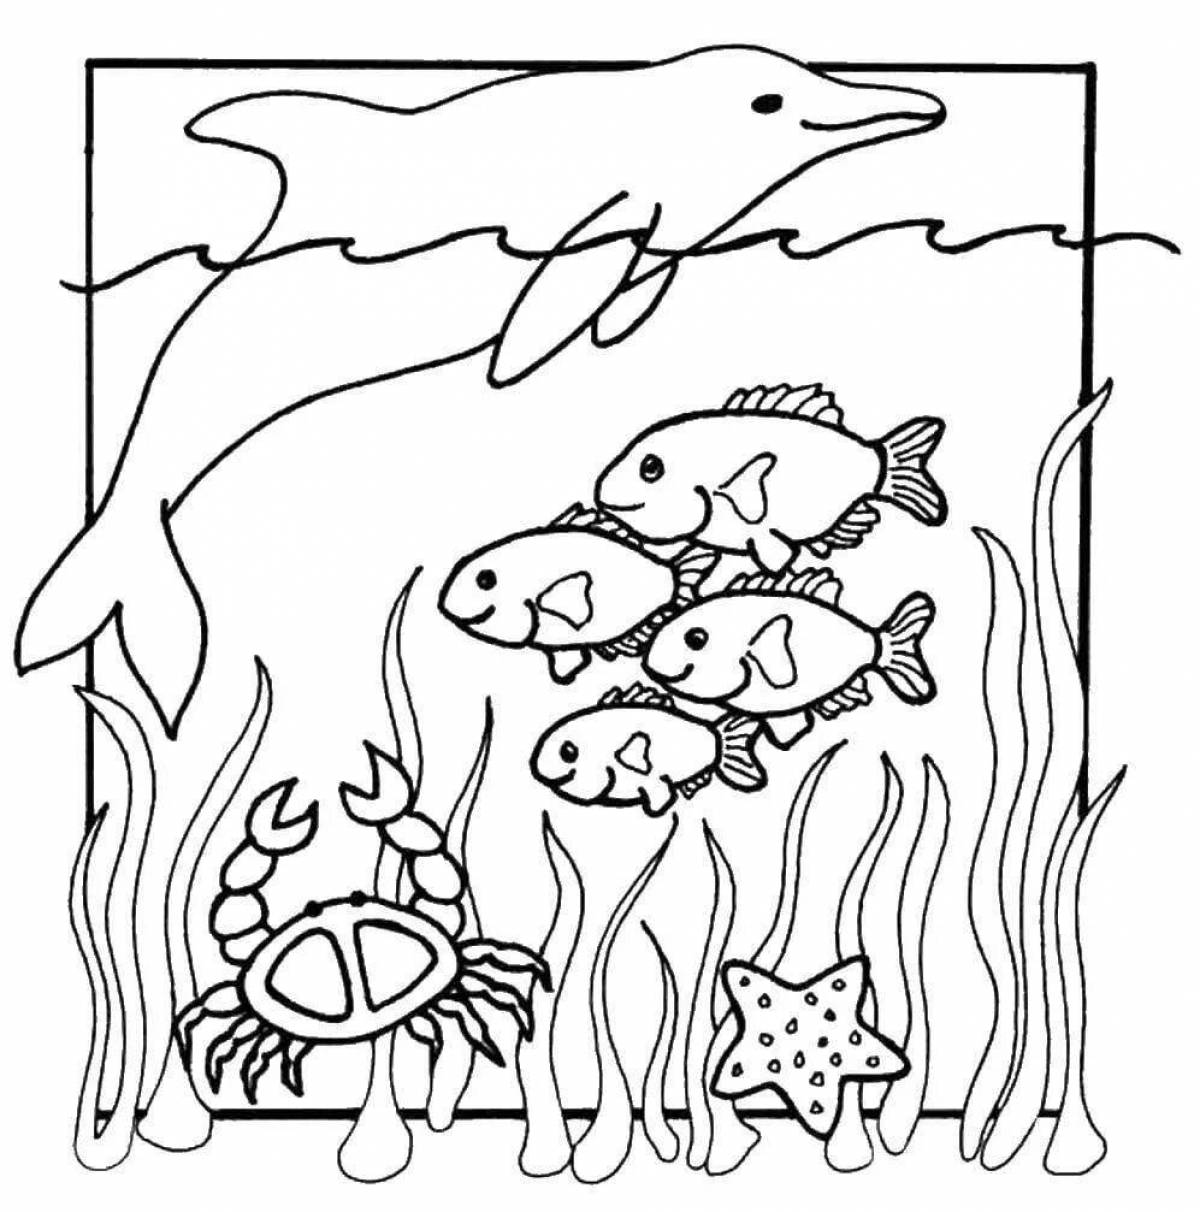 Crazy seabed coloring for kids